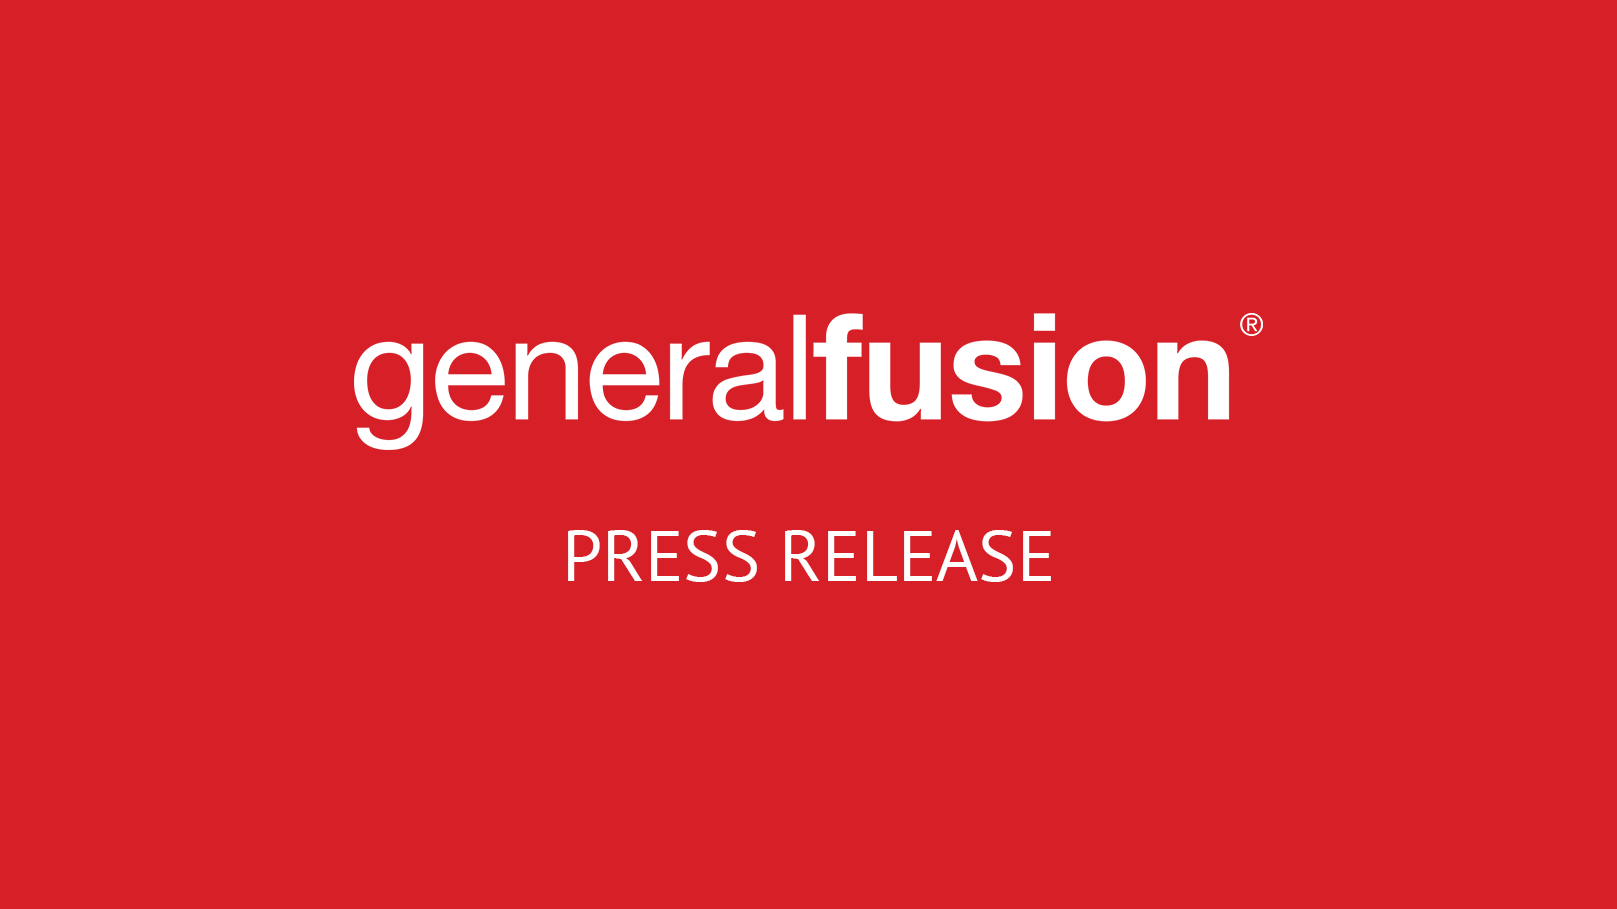 General Fusion and Canadian Nuclear Laboratories partner to accelerate cleantech in Canada